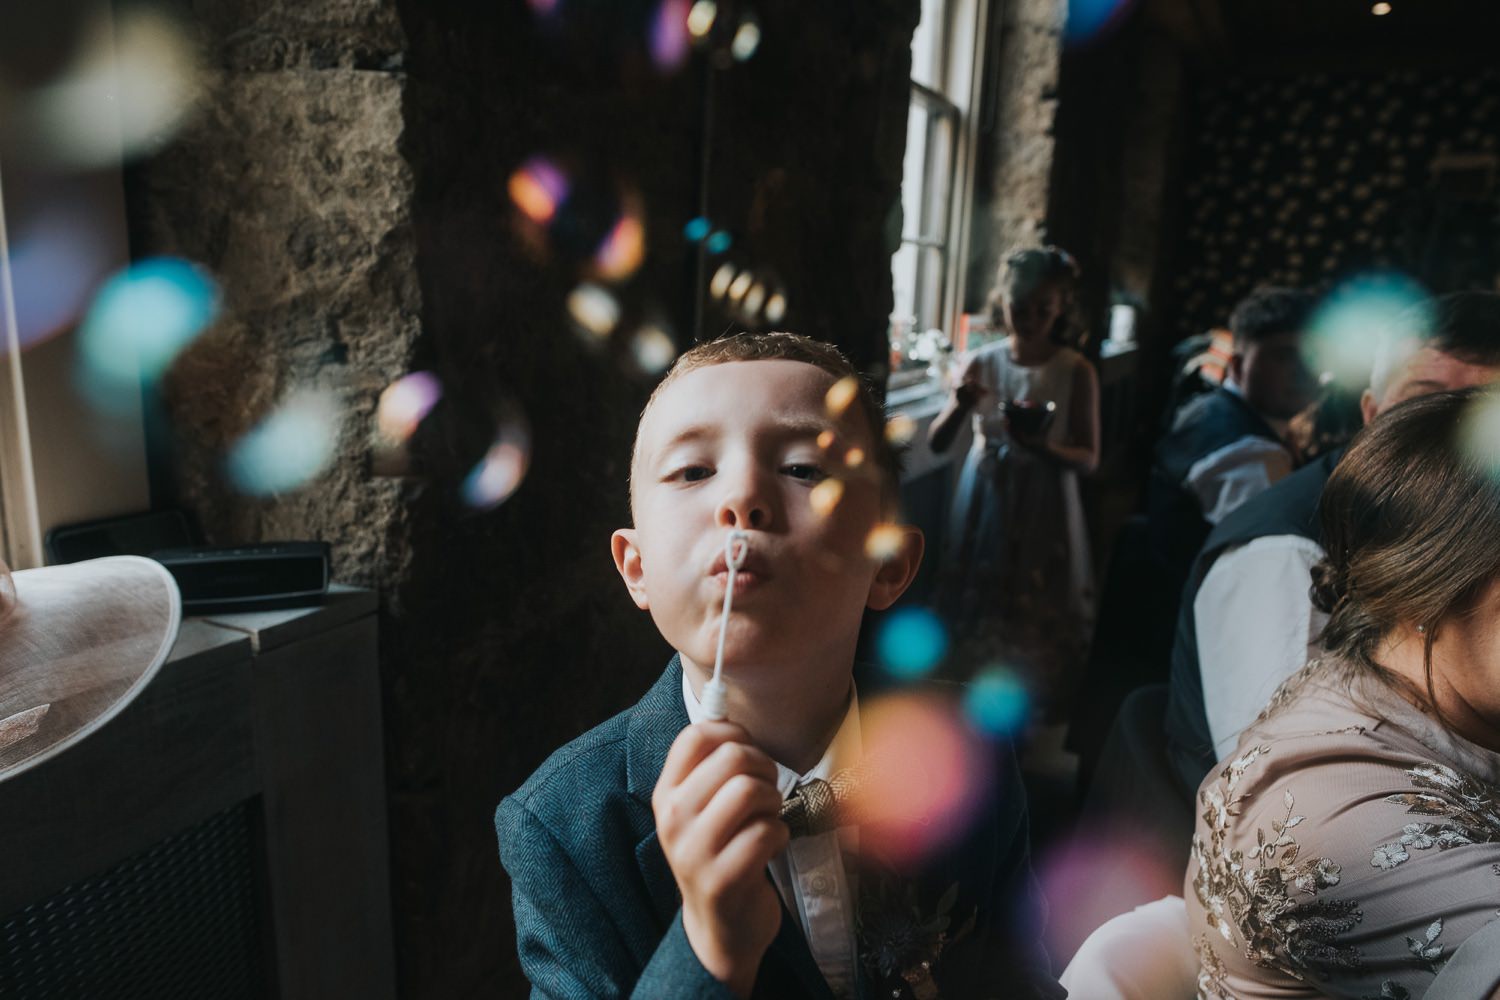 A young boy blows bubbles at the camera